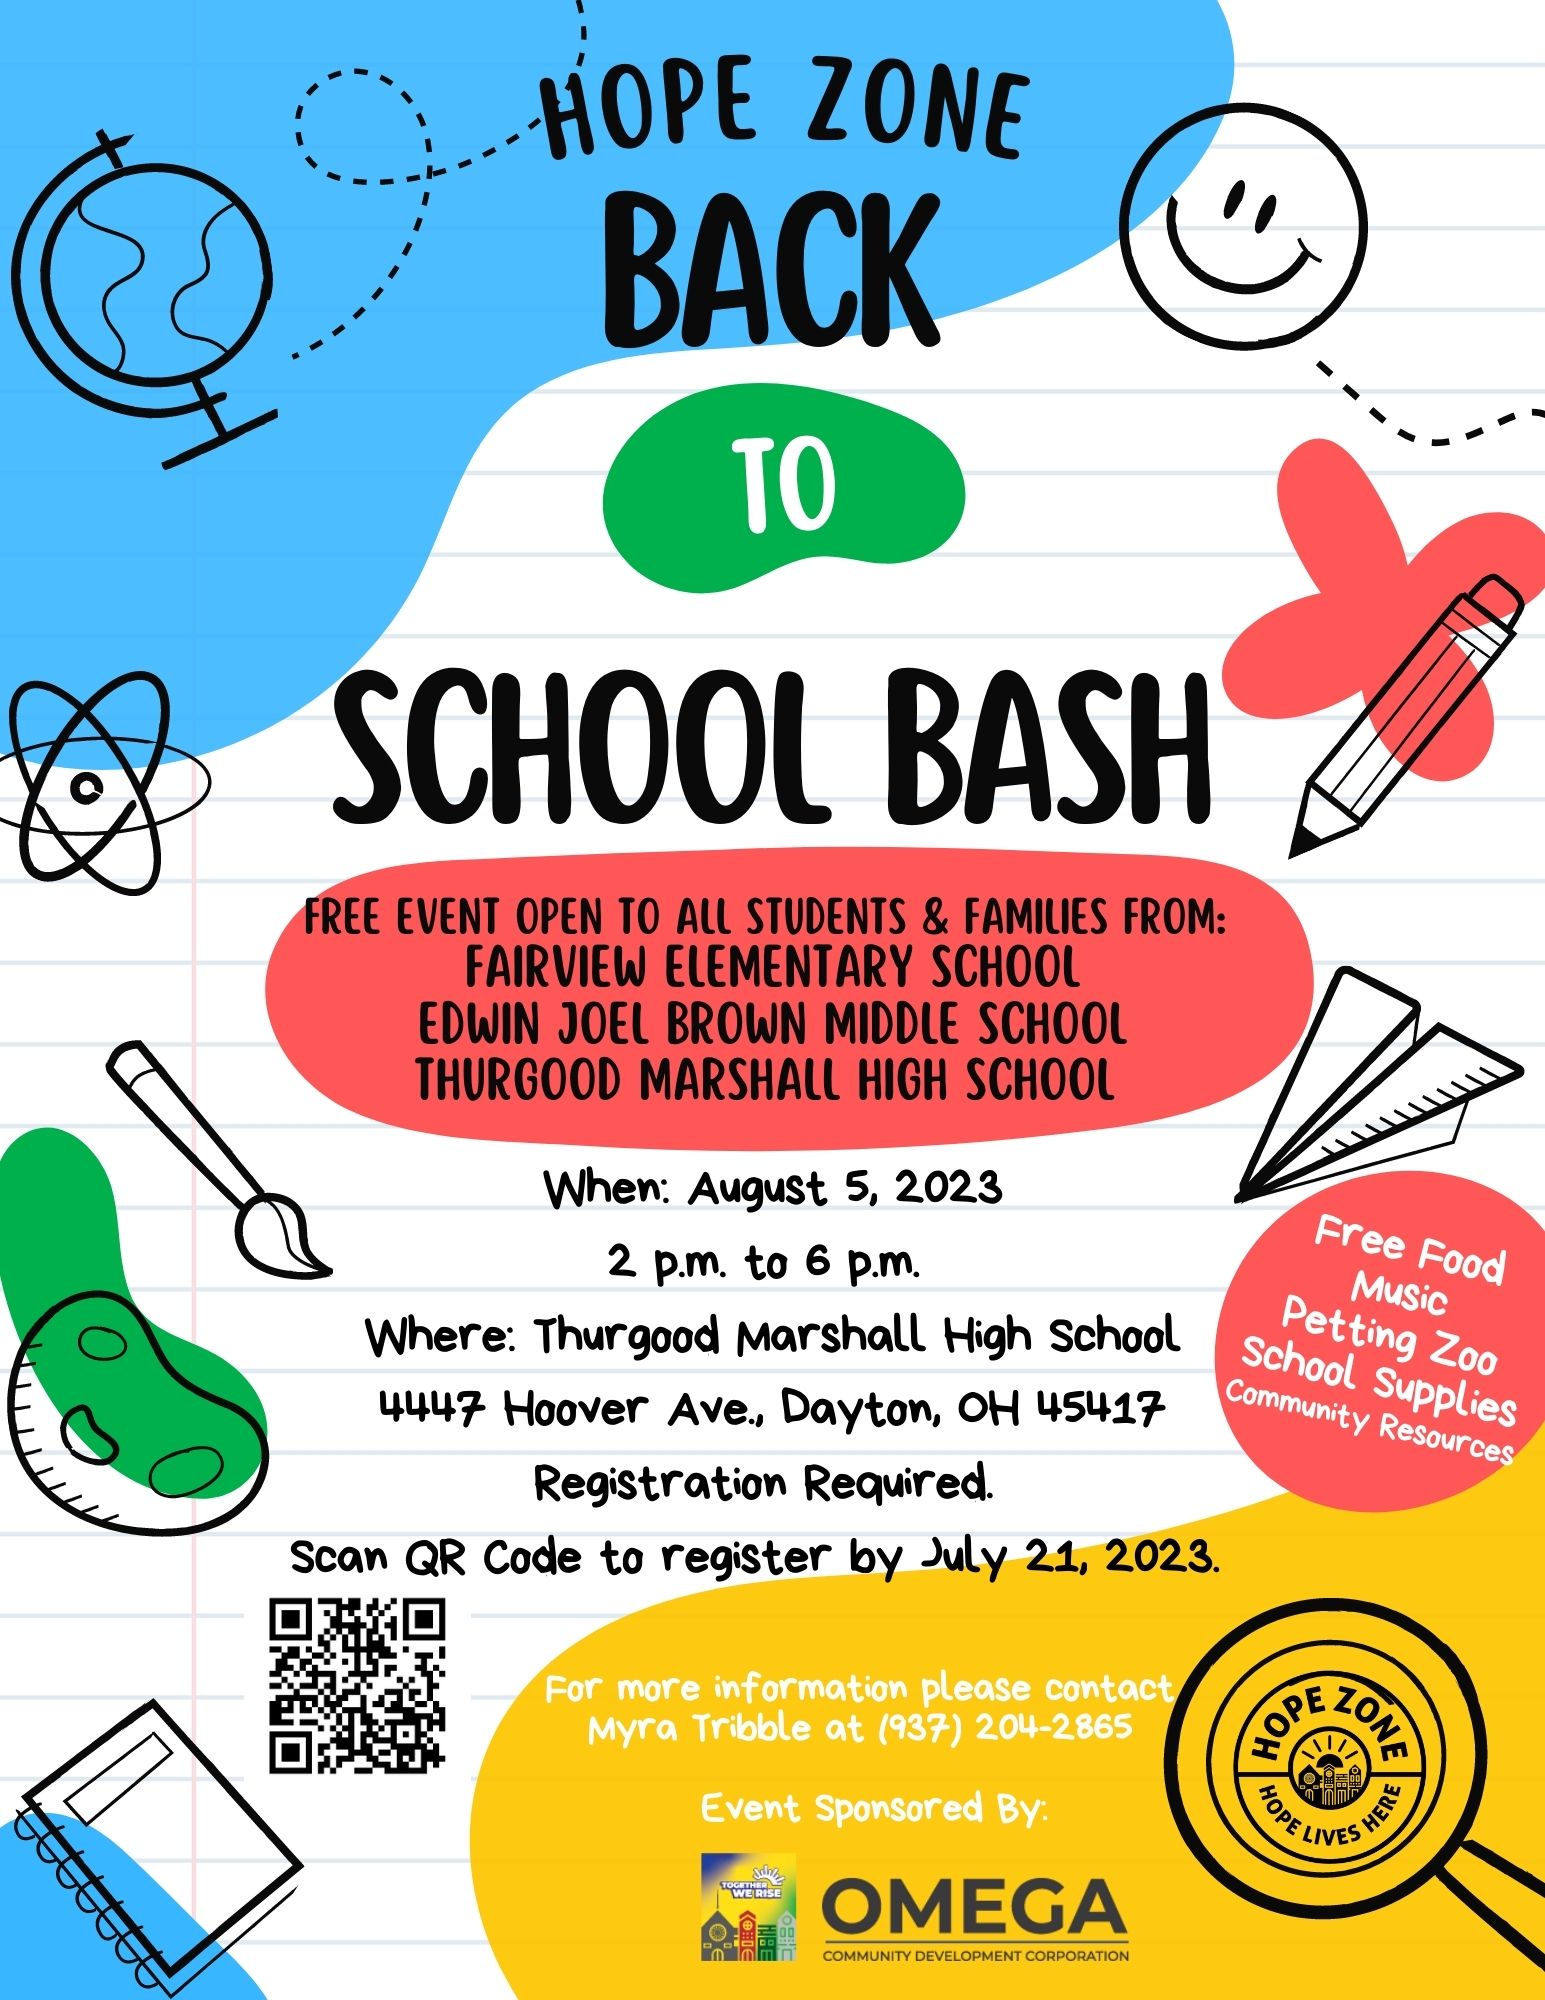 Featured image for “Hope Zone Back to School Bash”